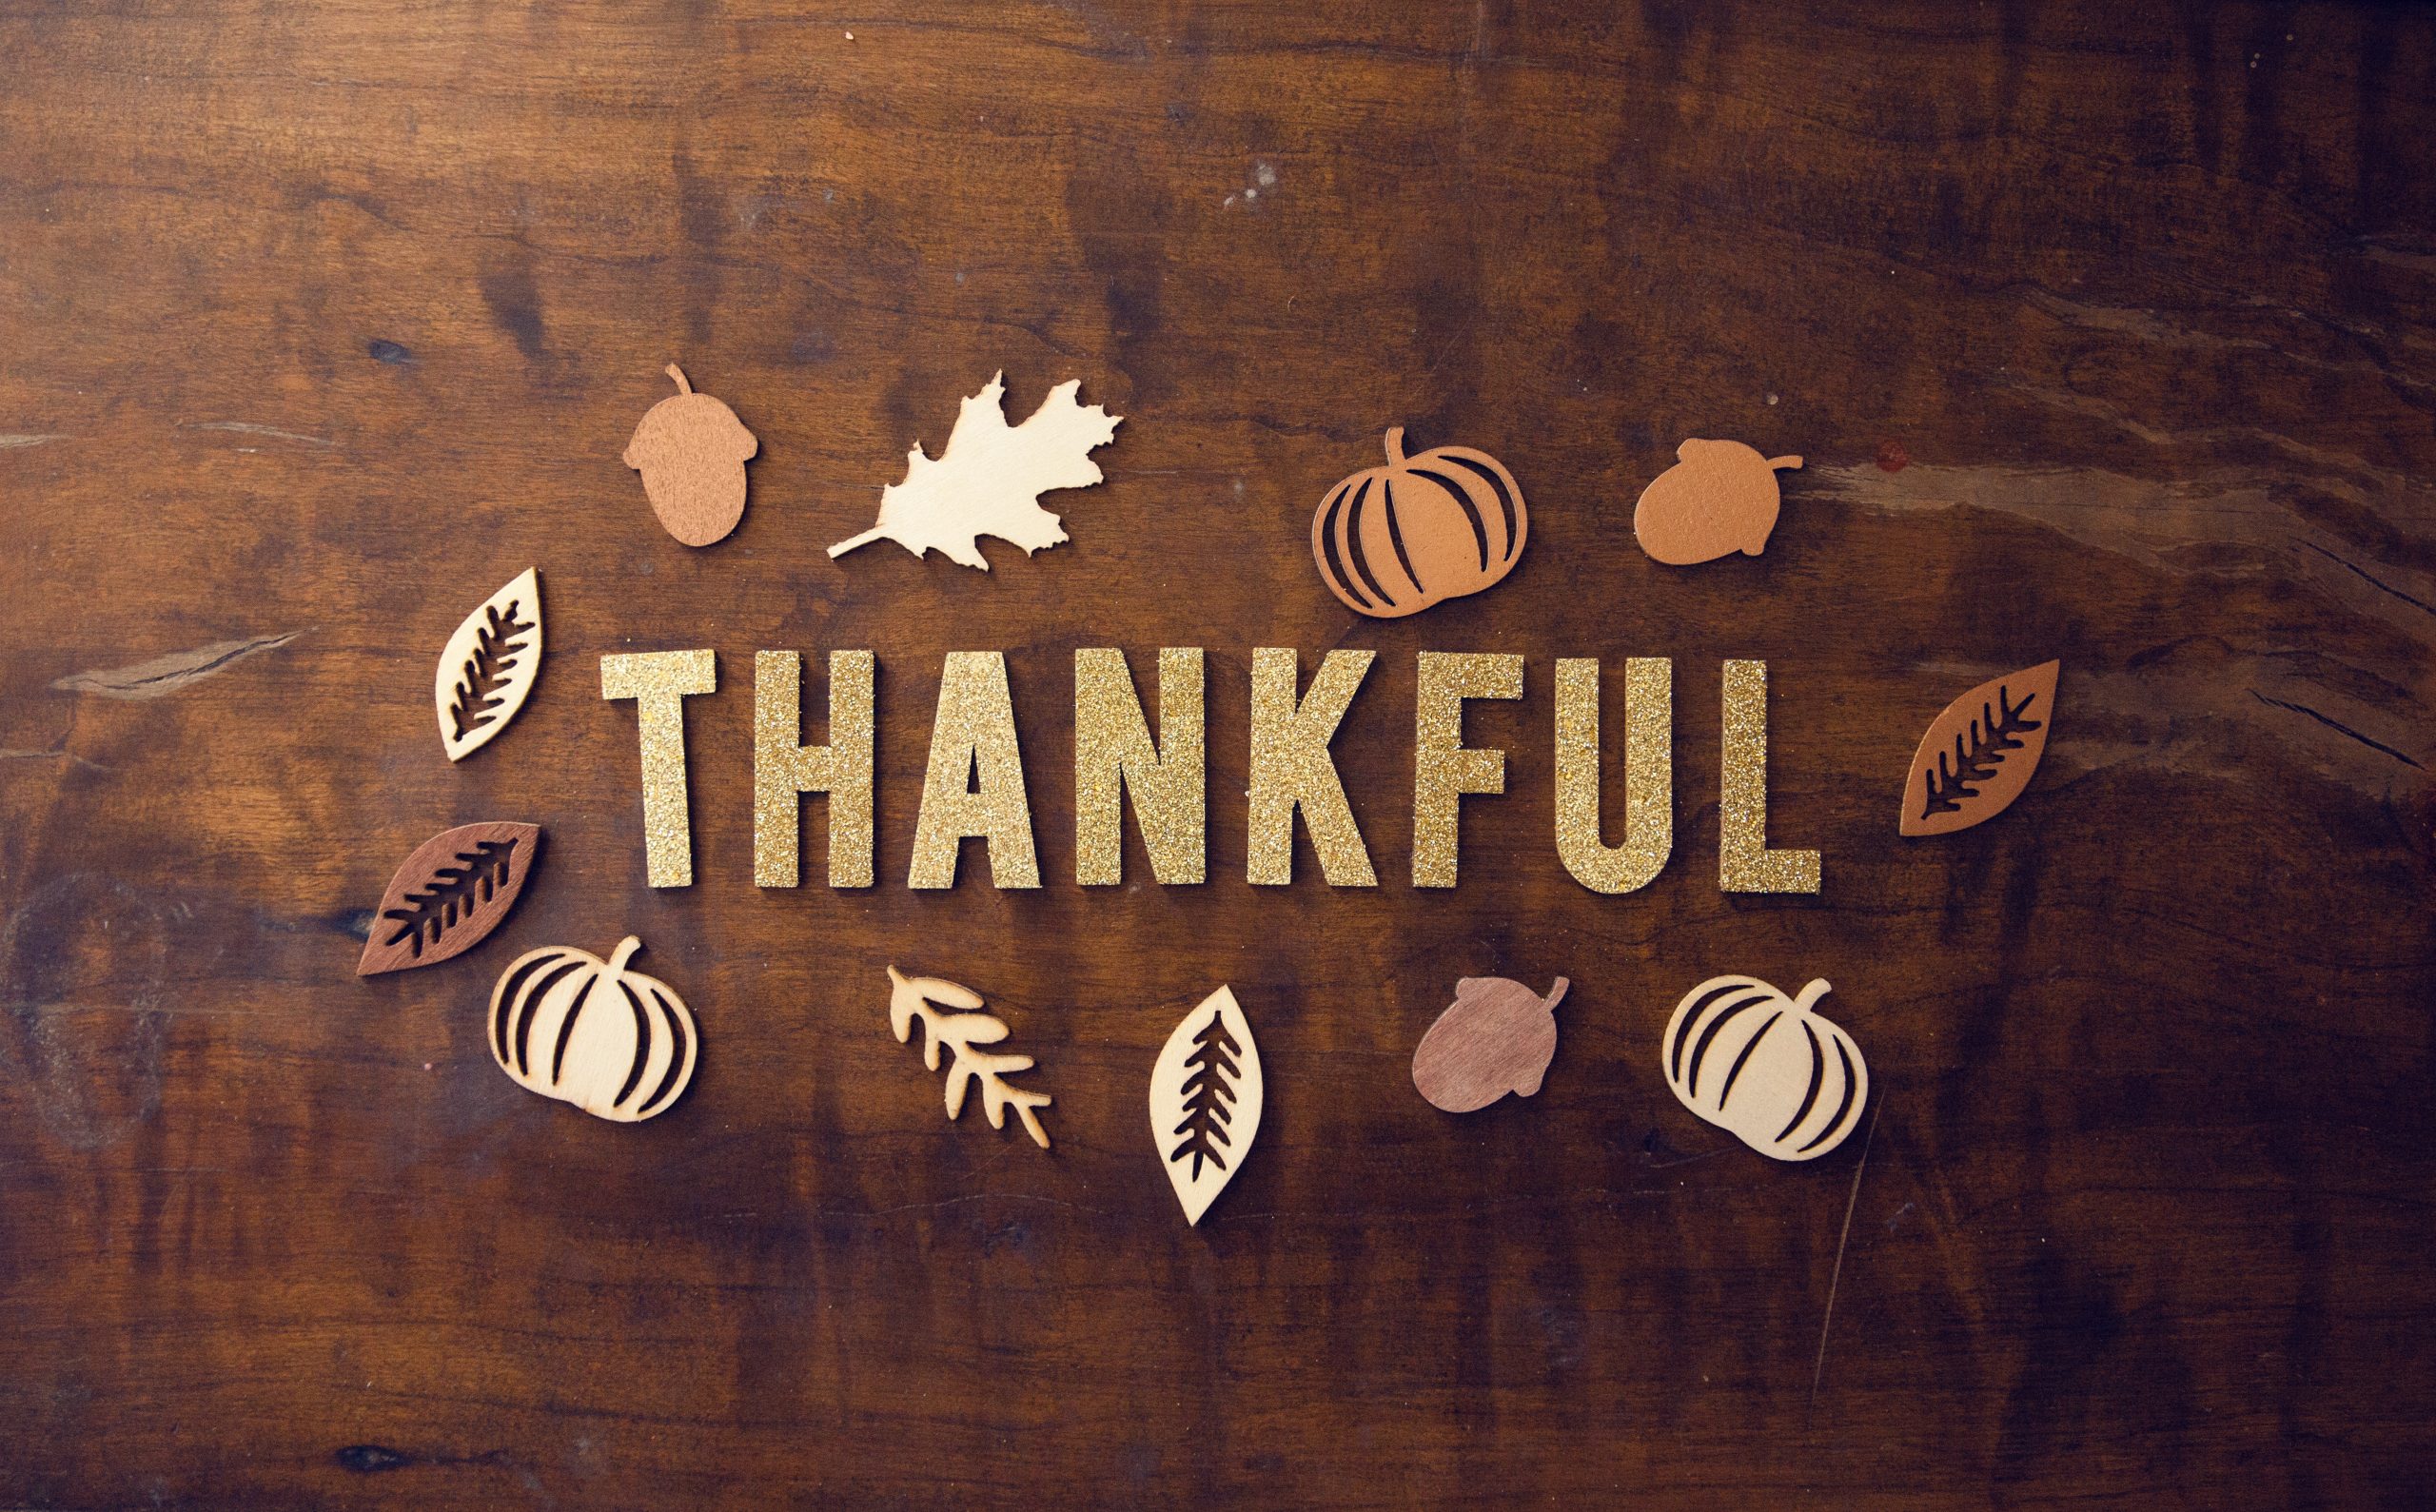 The word THANKFUL spelled out in glitter letters surrounded by autumn decorations on a wooden surface.